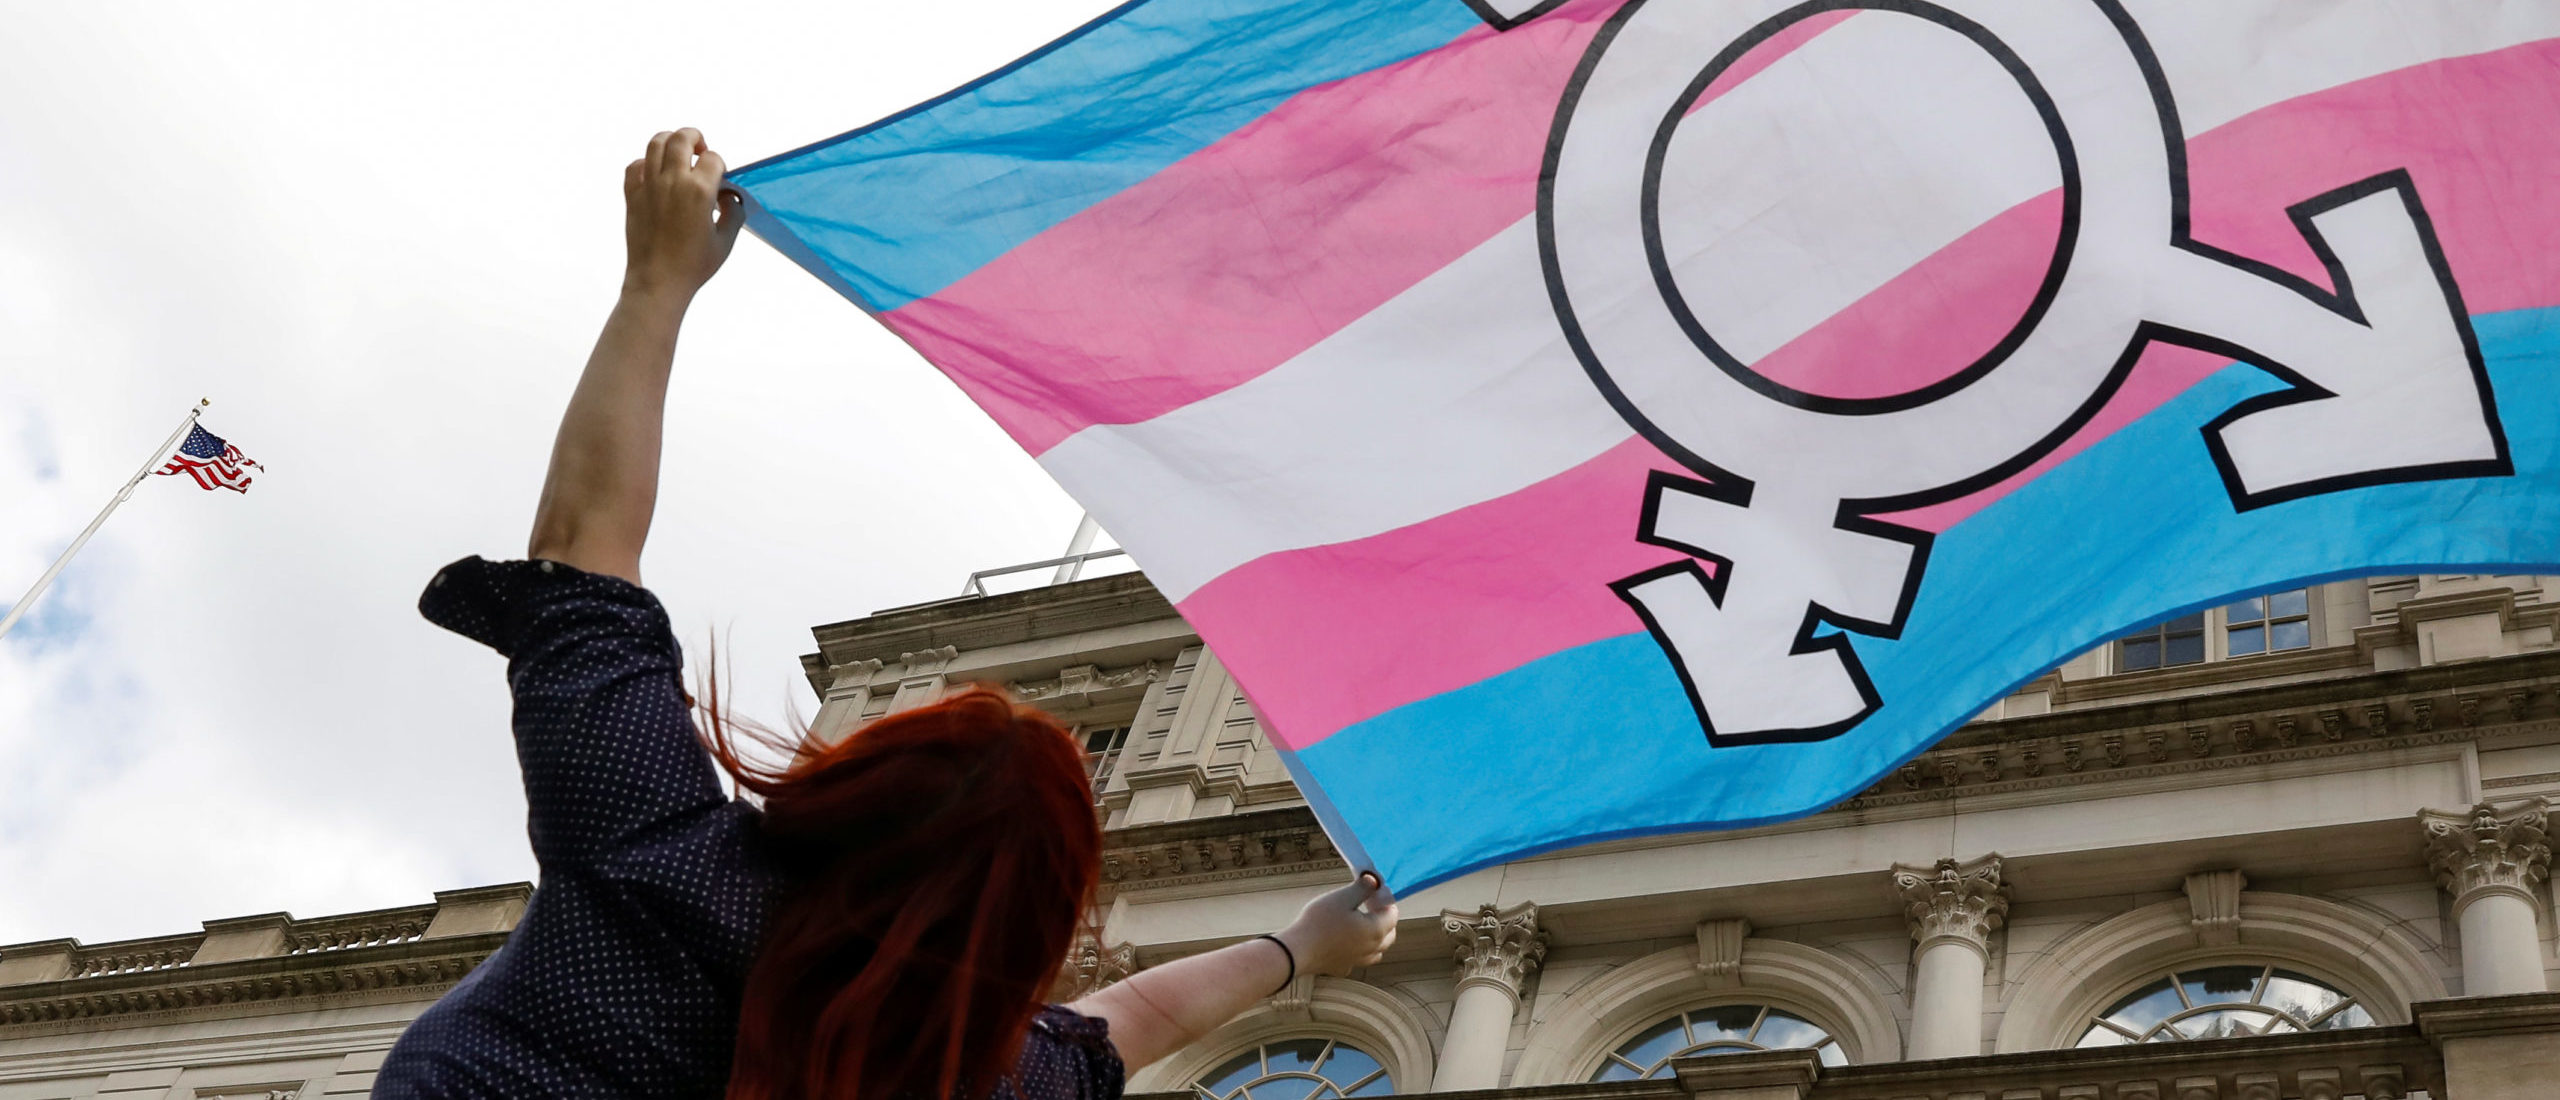 A person holds up a flag during rally to protest the Trump administration's reported transgender proposal to narrow the definition of gender to male or female at birth, at City Hall in New York City, U.S., October 24, 2018.